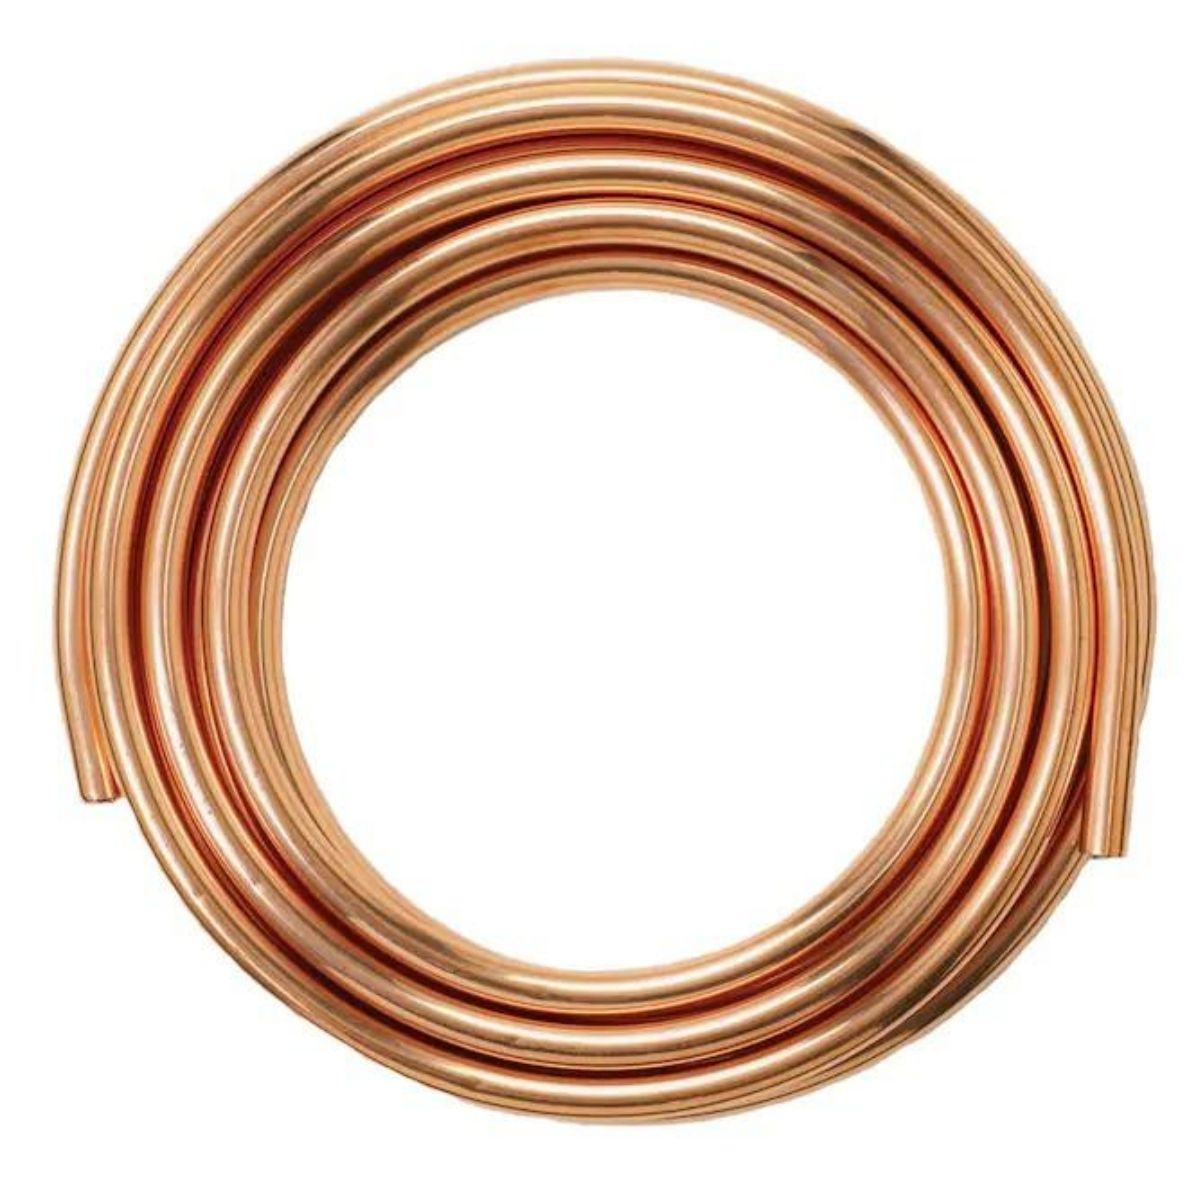 The Copper Pipe Types Option: Type K Copper Pipe